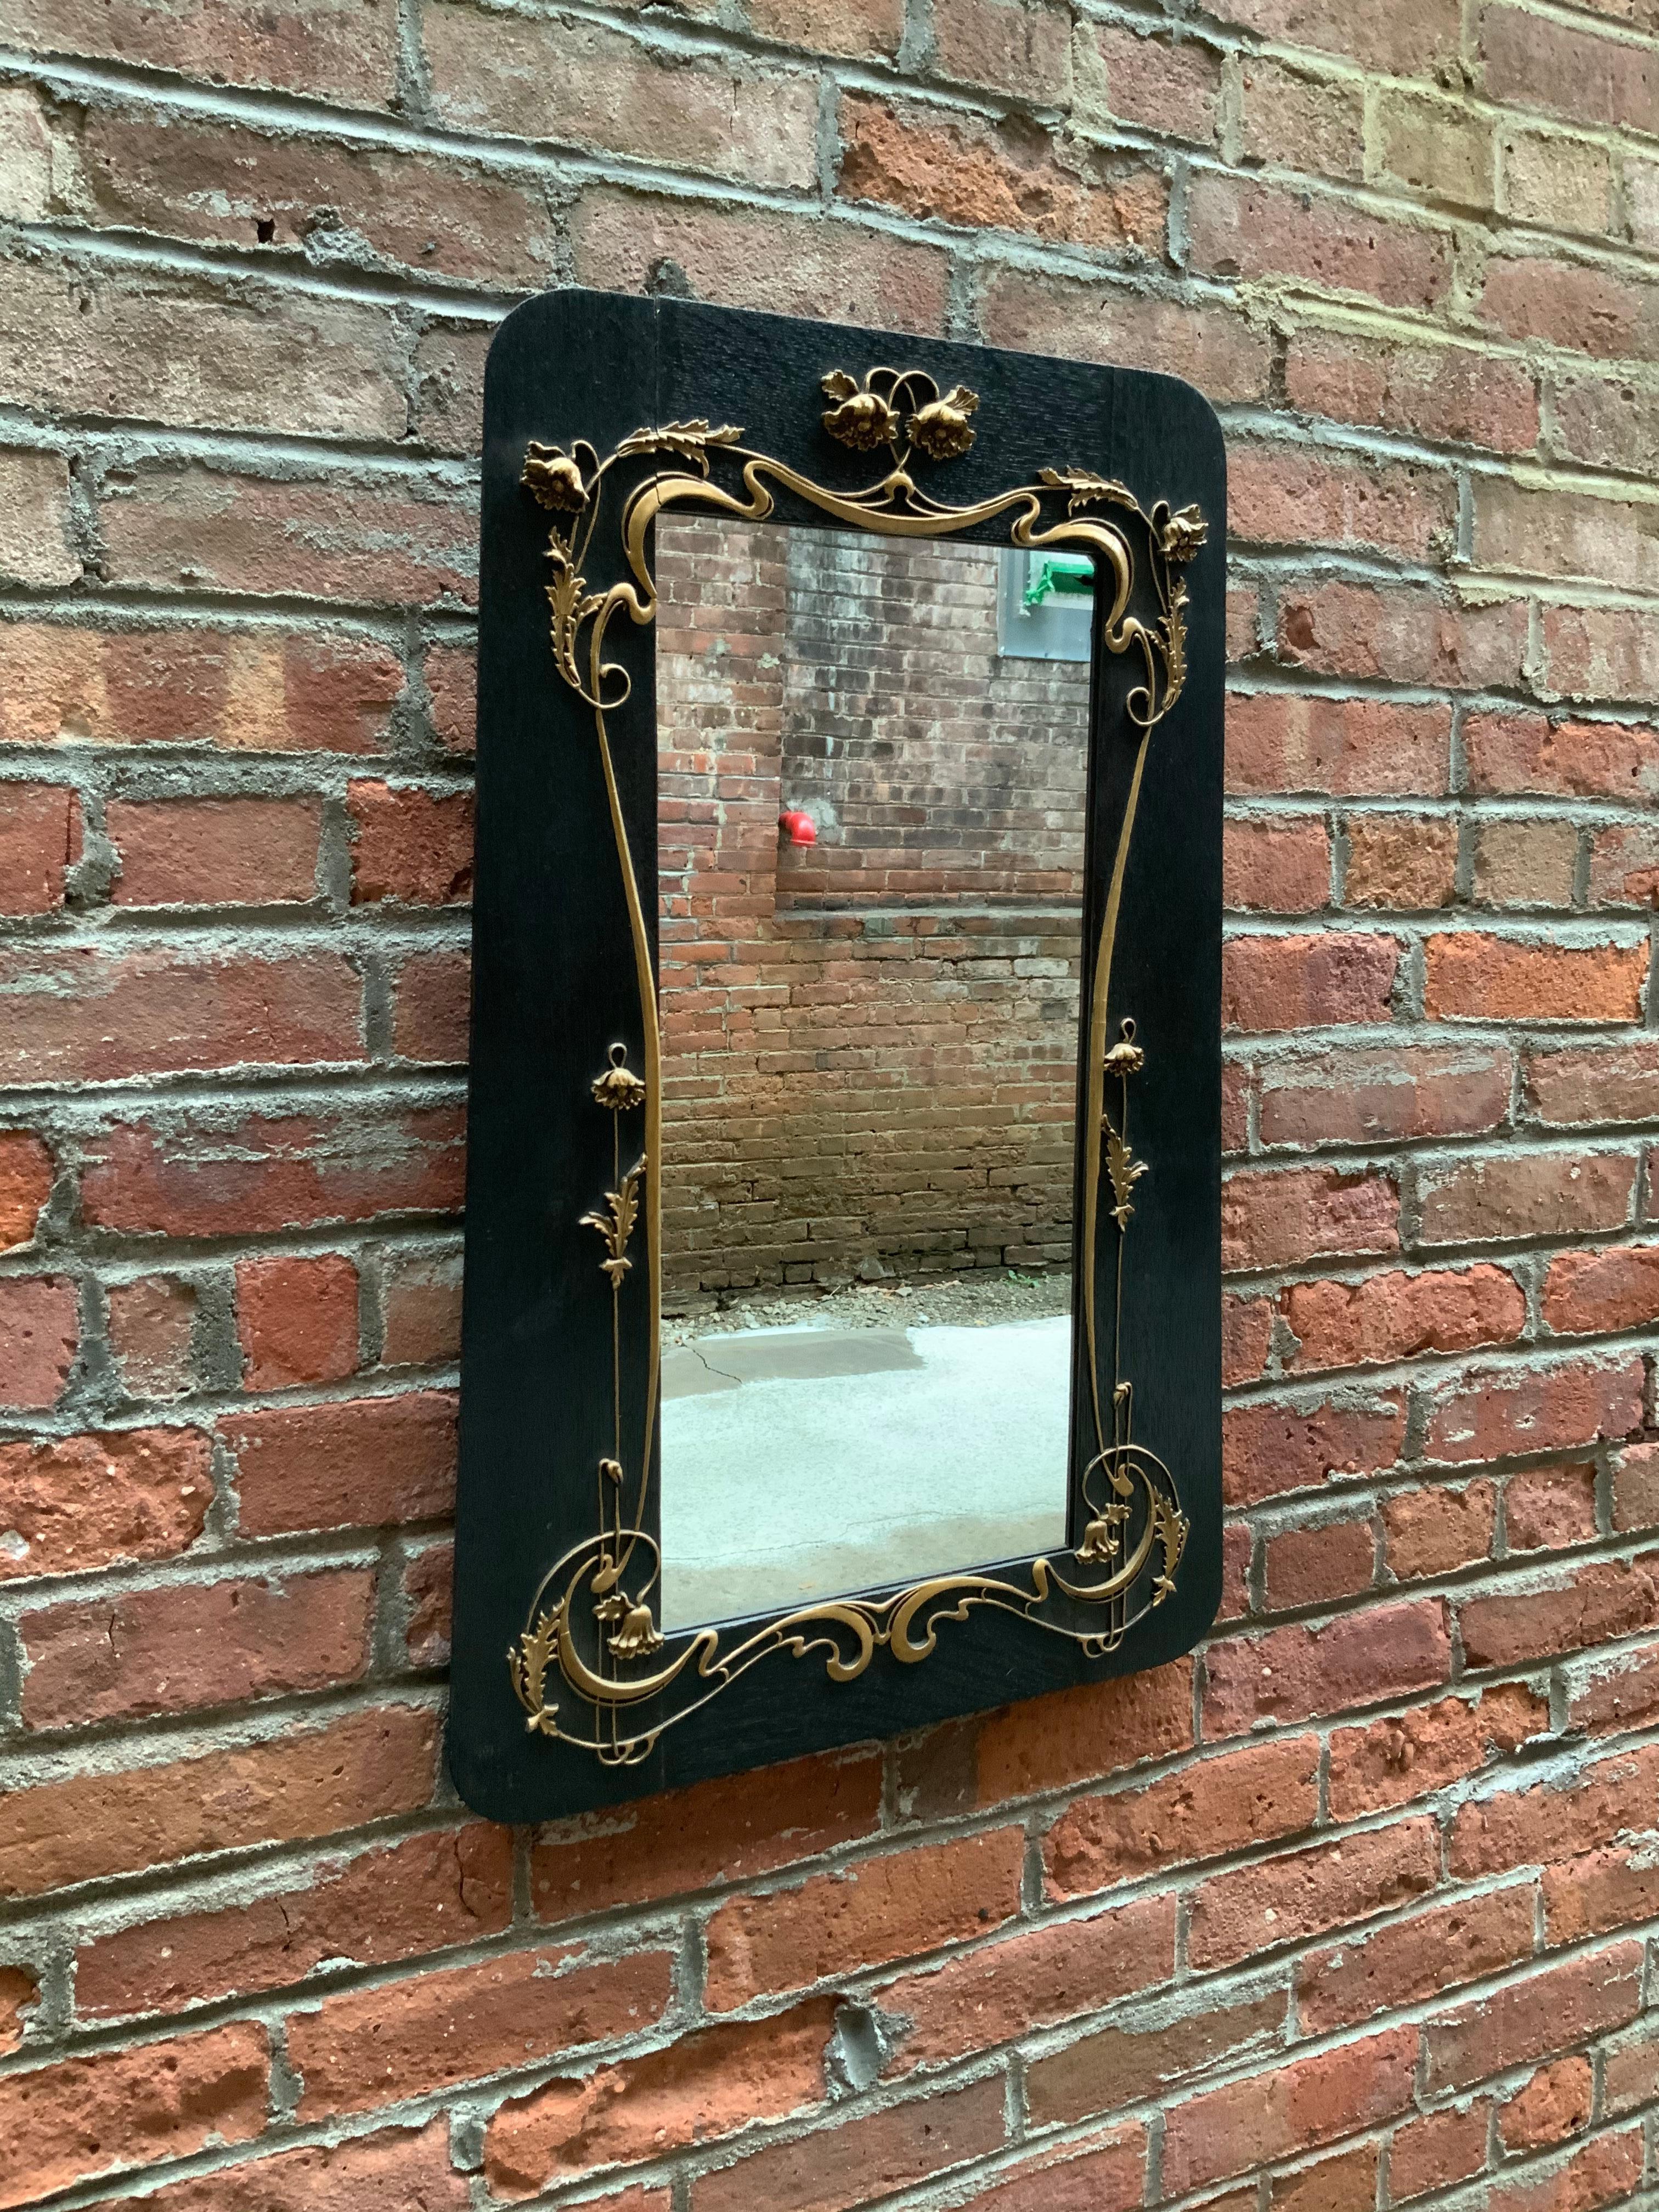 American Art Nouveau foliate and scroll decorated fumed oak mirror. Intricately gilded gesso decoration, circa 1890-1910. Slightly tapered profile. Very good condition with no visible losses to the gesso.

Approximate measurements are 26.88” high.